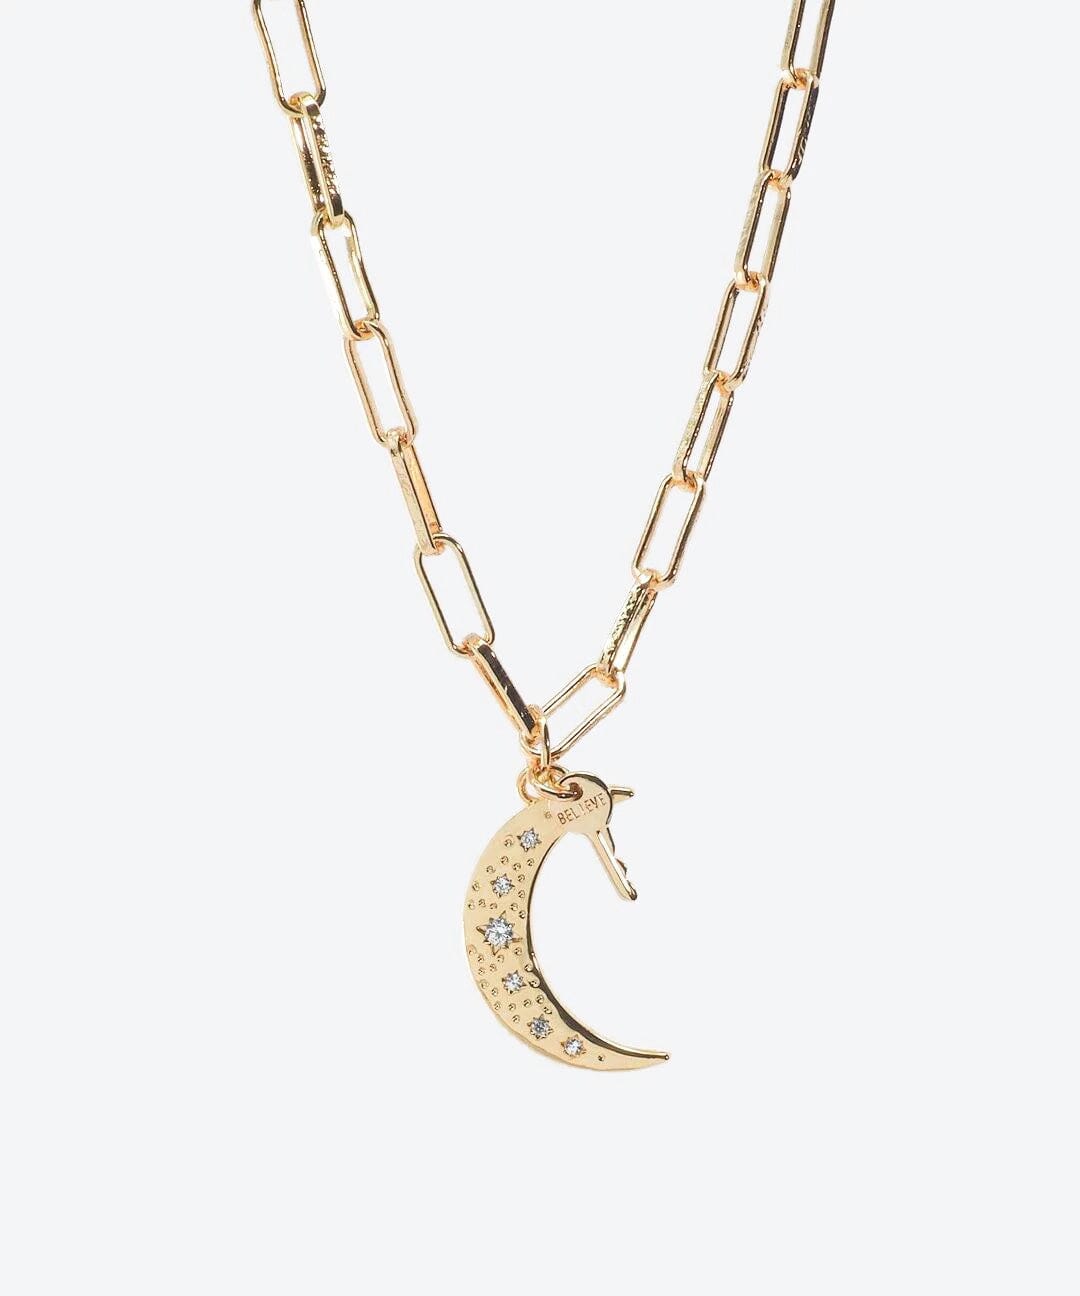 Moon Pendant + Mini Key Necklace Necklaces The Giving Keys Believe GOLD 